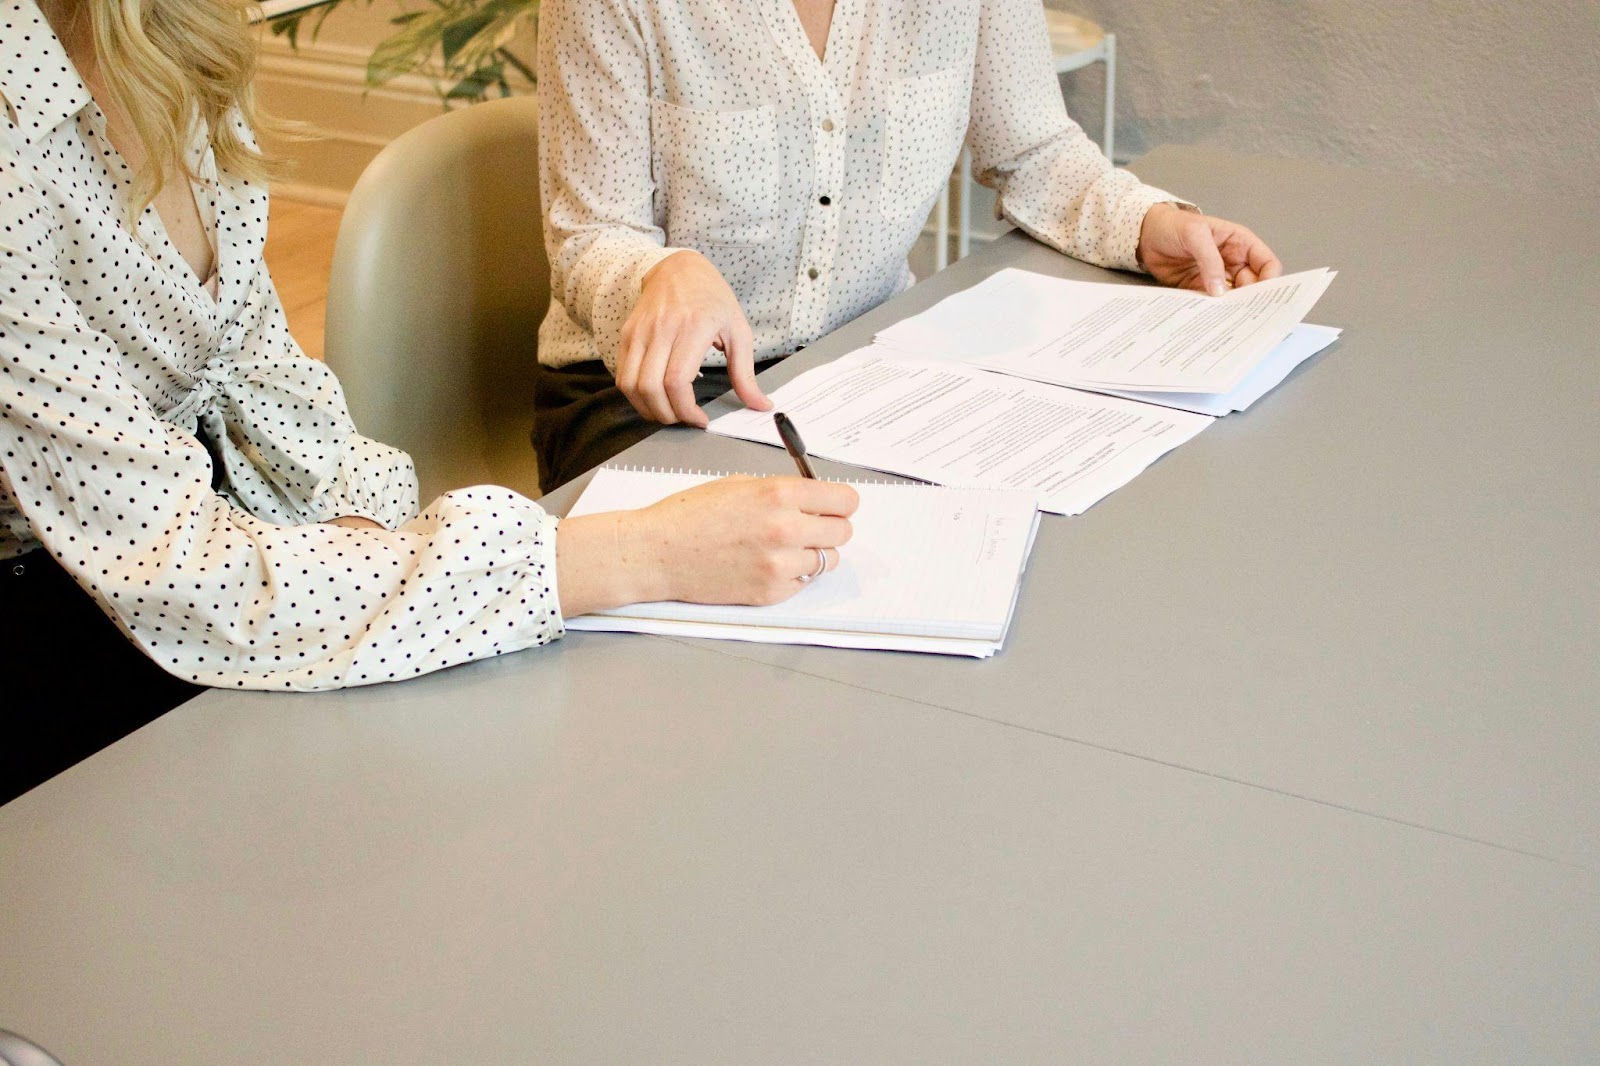 https://unsplash.com/photos/woman-signing-on-white-printer-paper-beside-woman-about-to-touch-the-documents-HJckKnwCXxQ